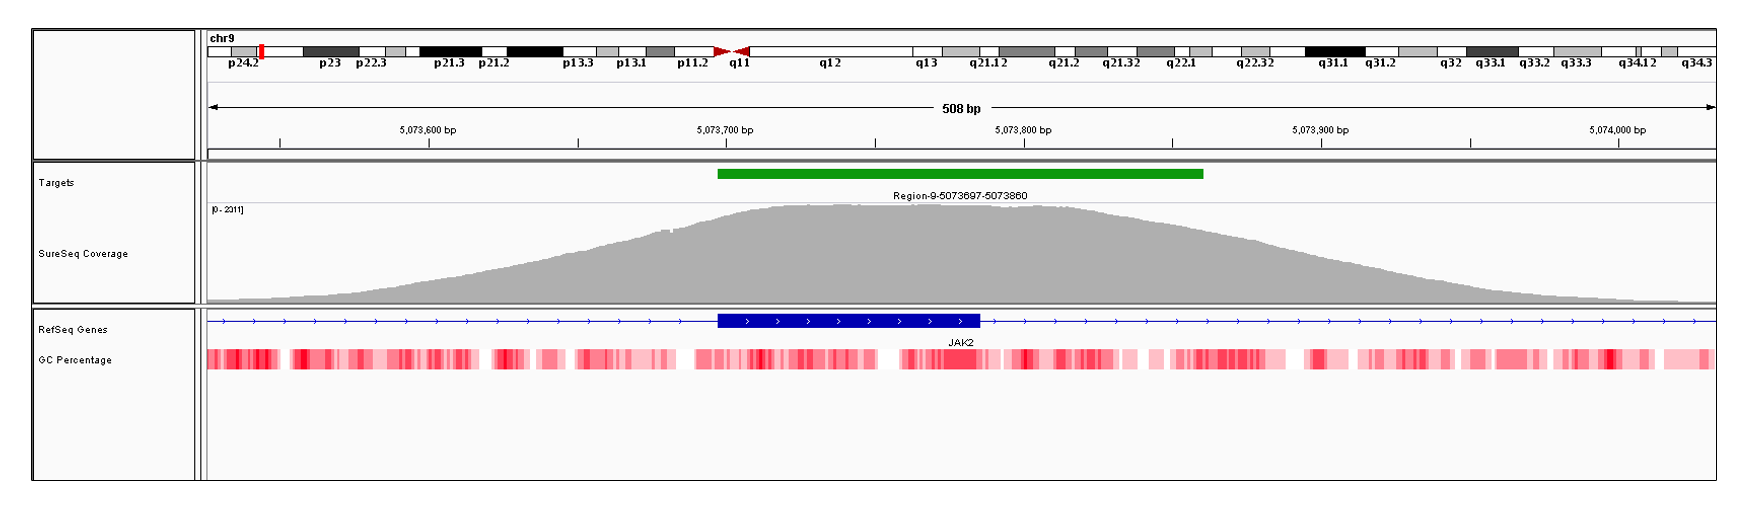 JAK2 Exon 14 (hg19 chr9:5073698-5073785). Depth of coverage per base (grey). Targeted region (green). Gene coding region as defined by RefSeq (blue). GC percentage (red). Image